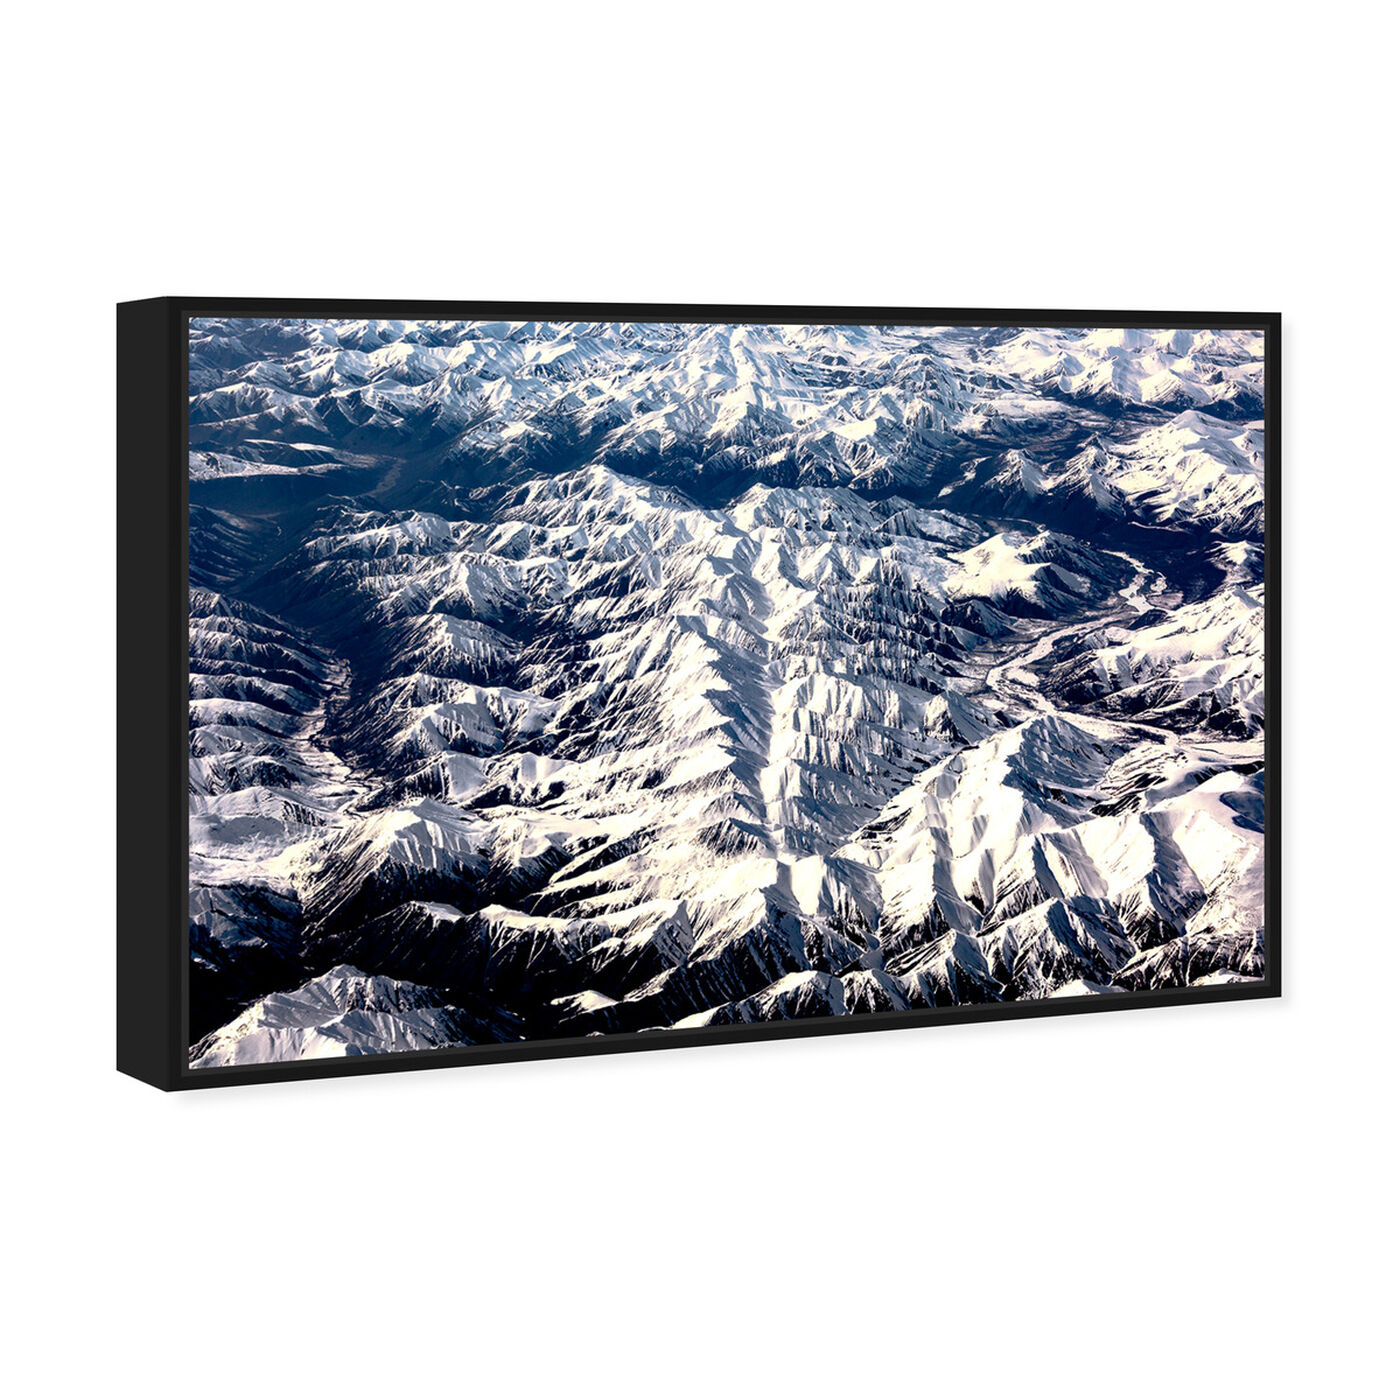 Angled view of Curro Cardenal - Aero View III featuring nature and landscape and mountains art.